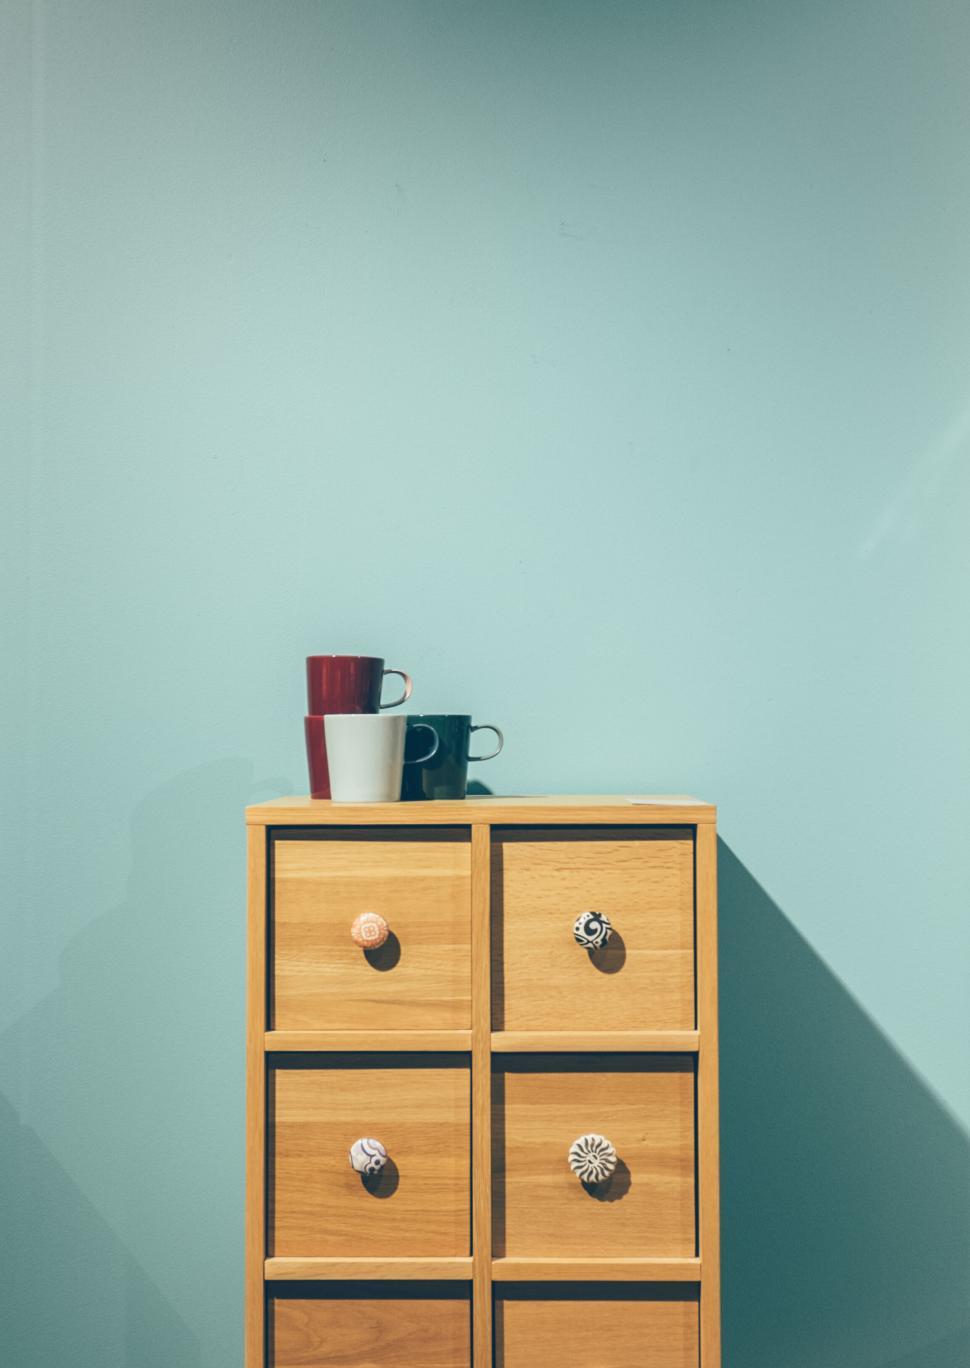 Free Image of Minimalist wooden cabinet with colorful mugs 